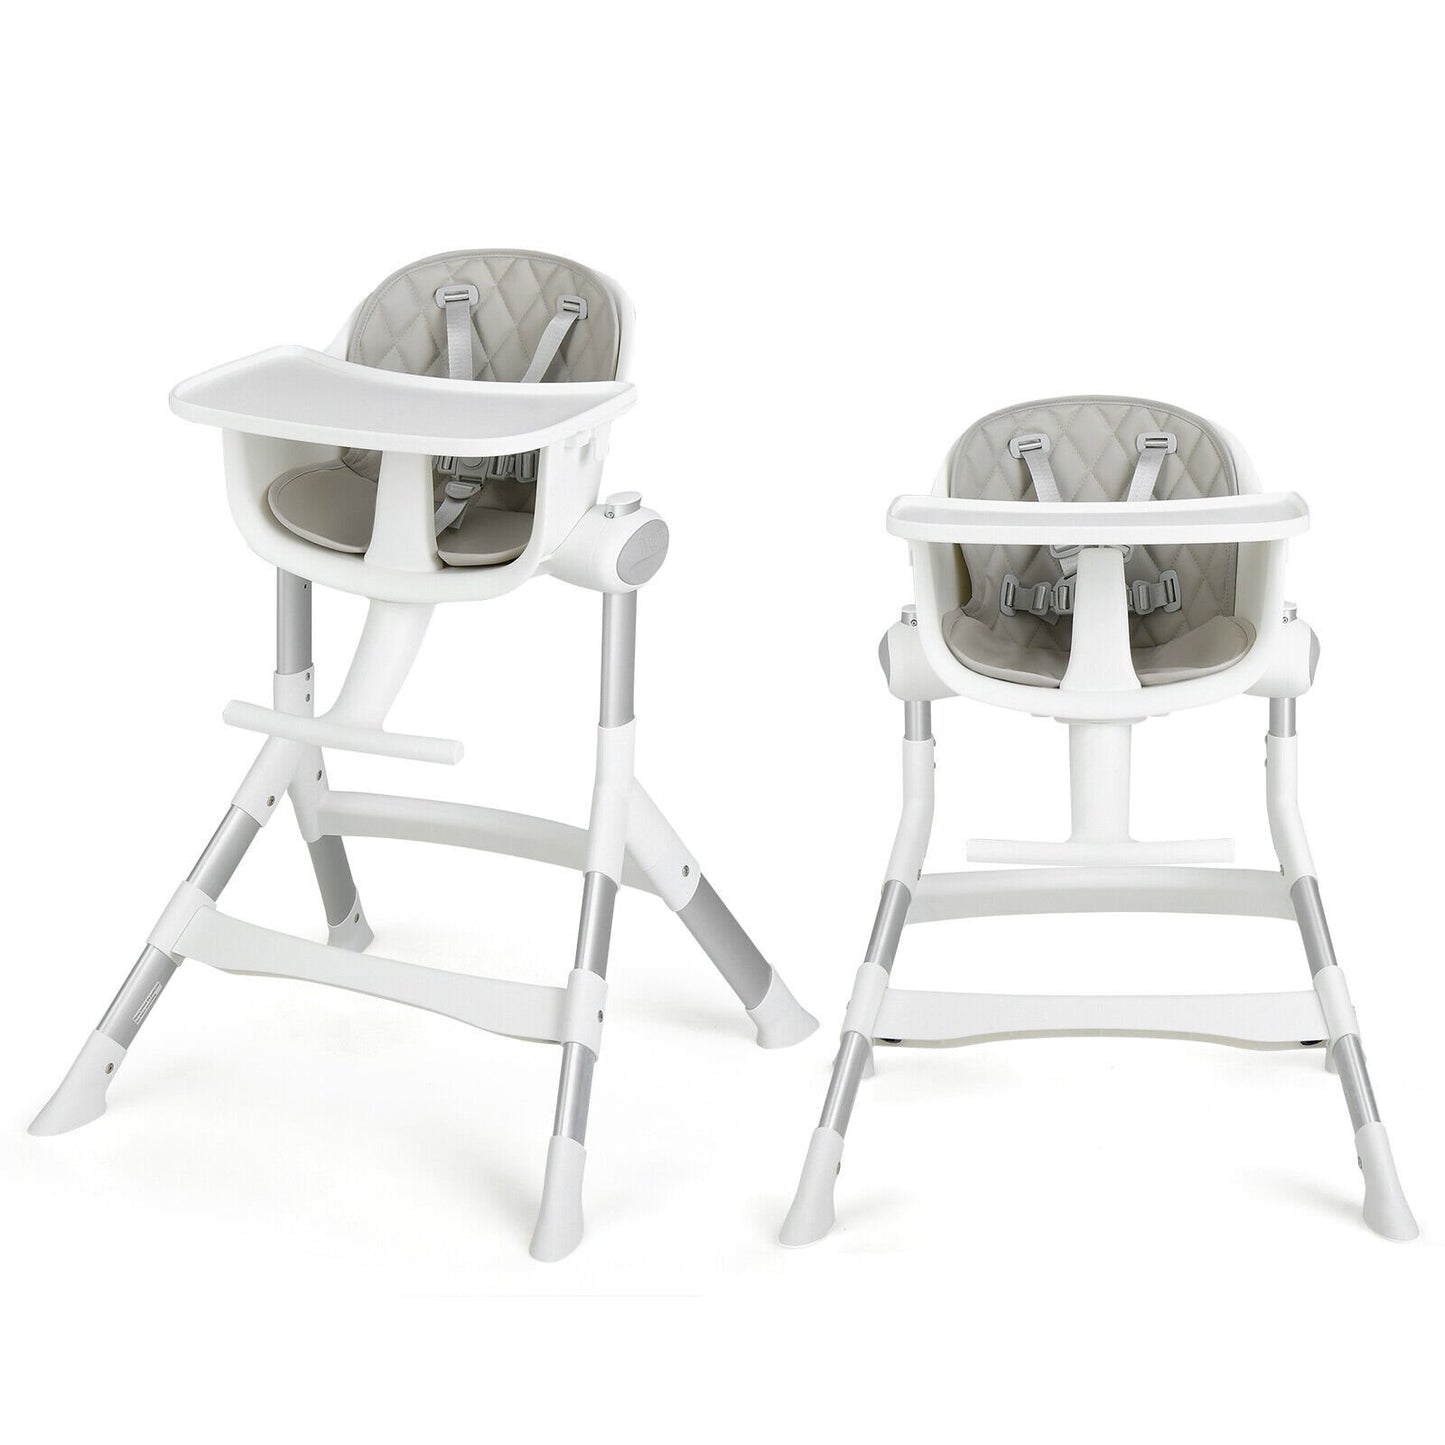 4-in-1 Convertible Baby High Chair with Aluminum Frame, Gray